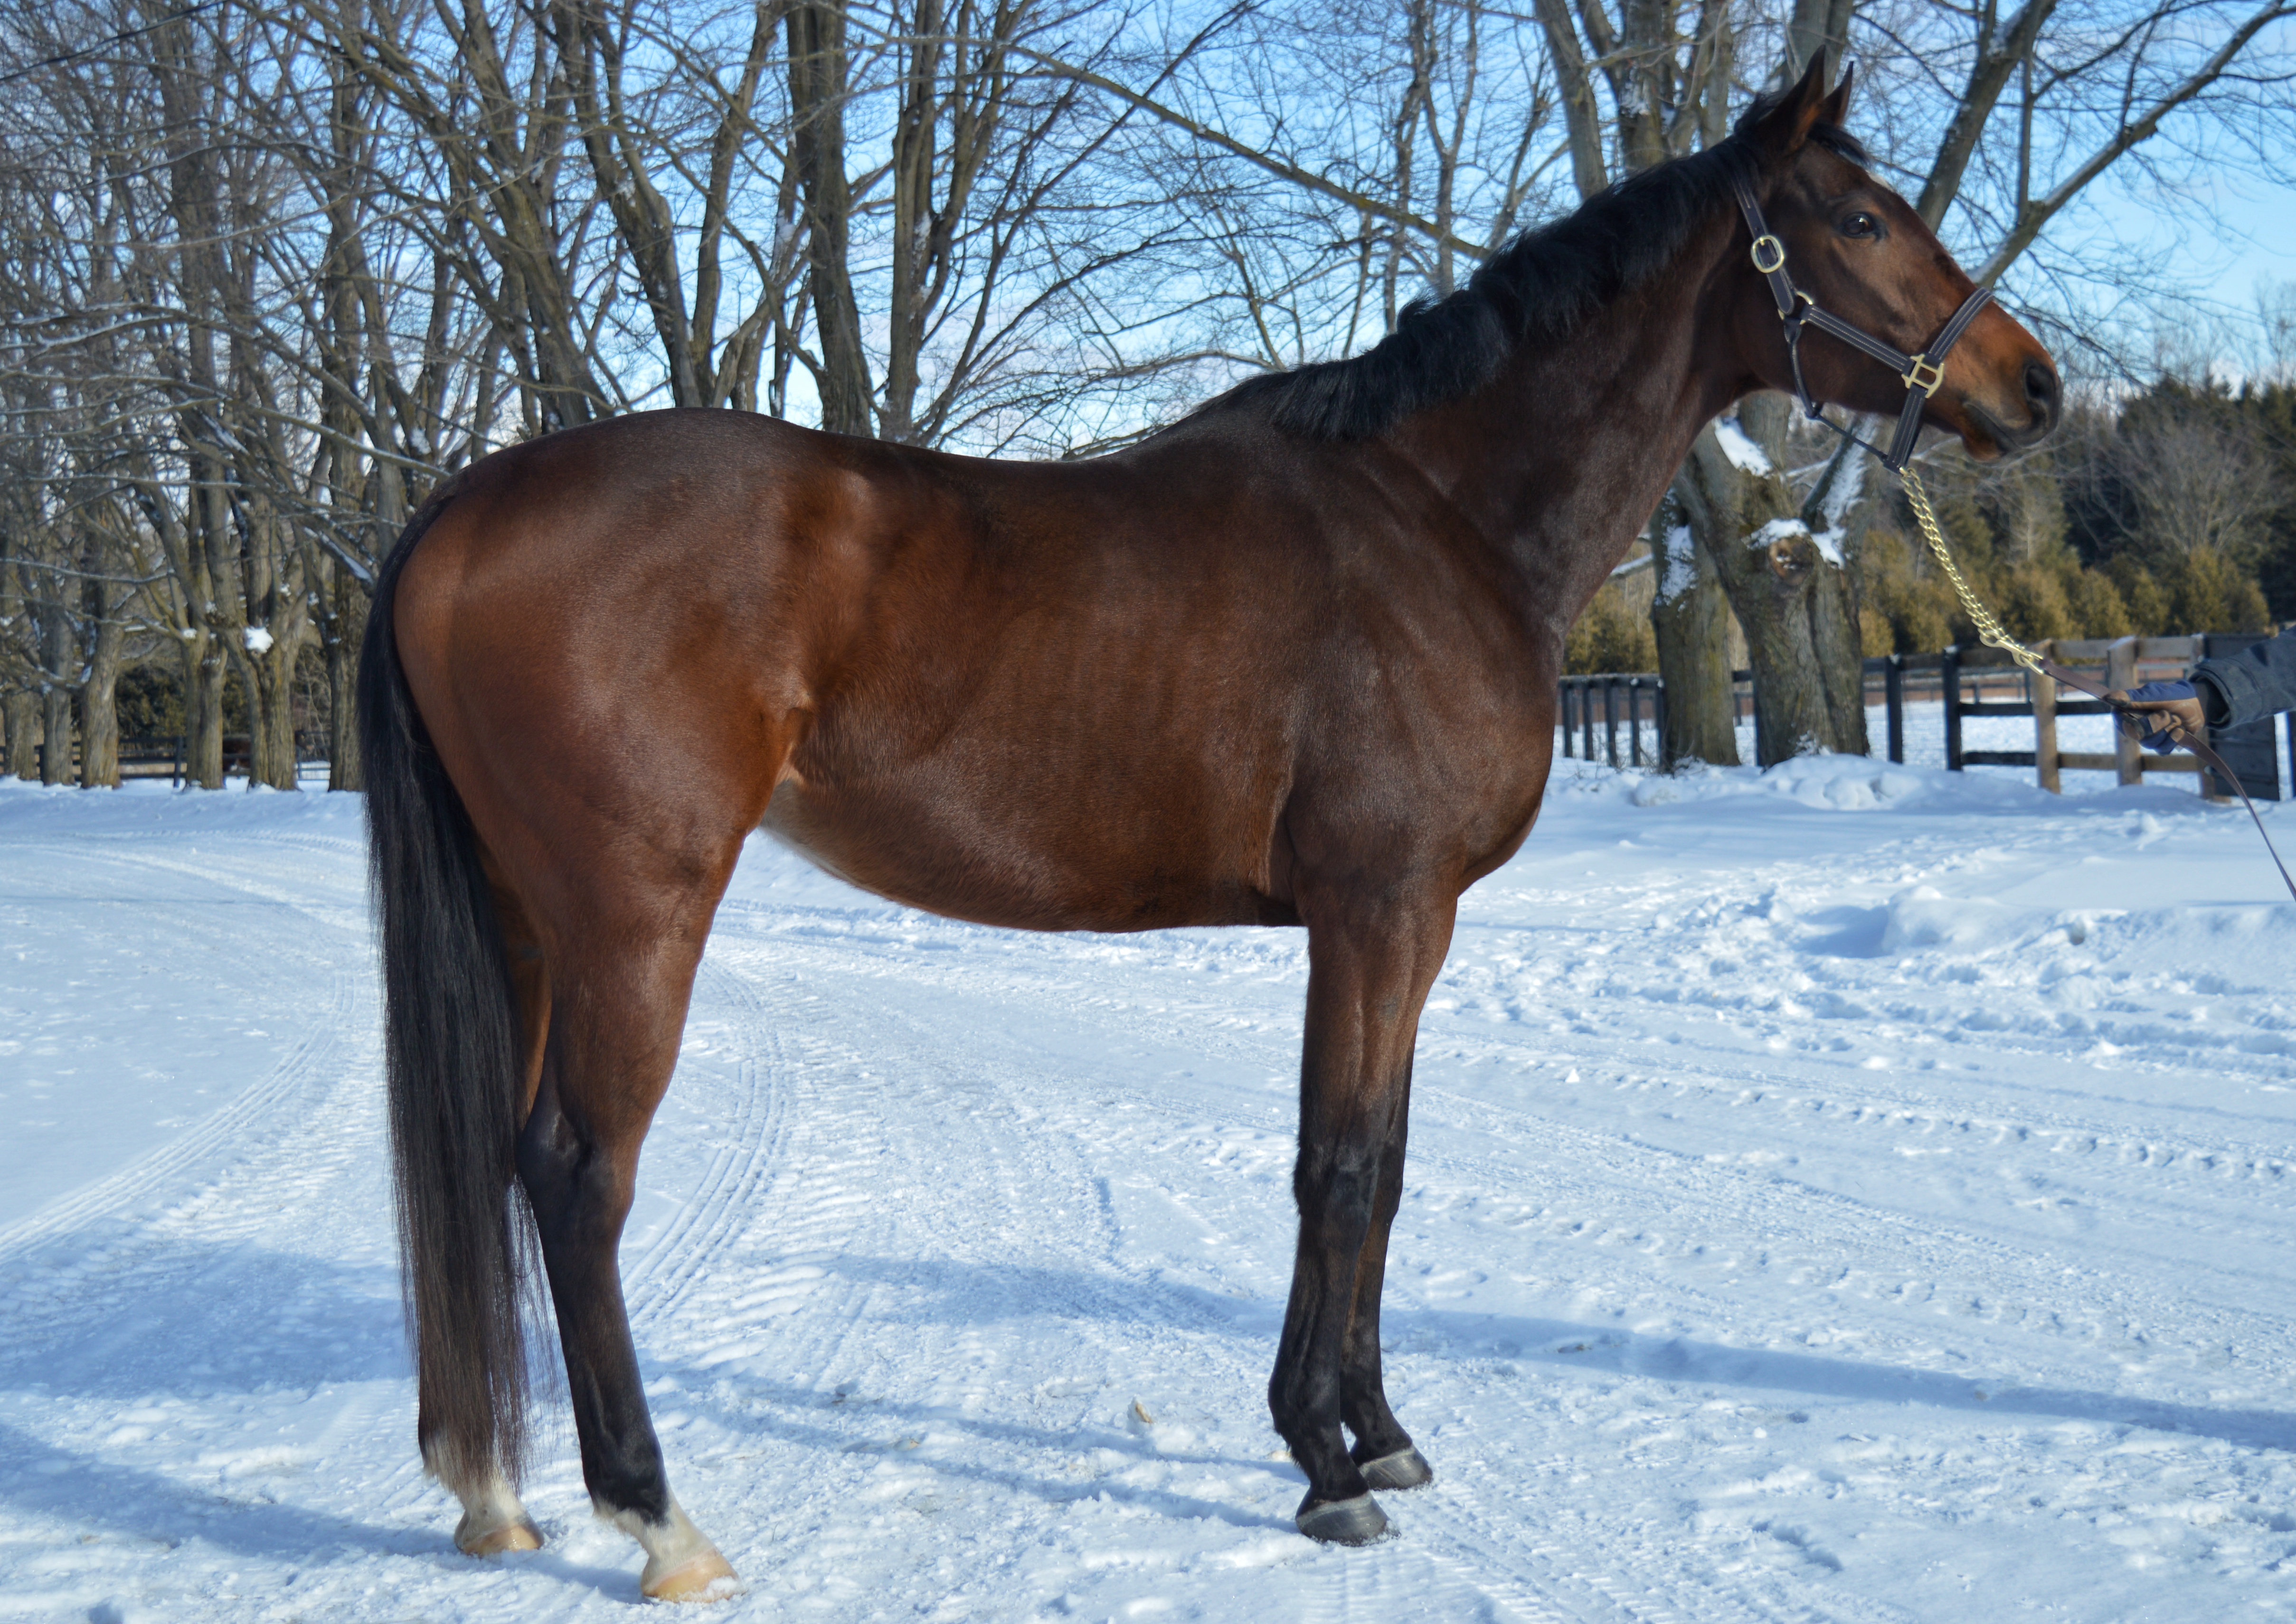 Dark Brown horse standing on a driveway in front of winter scenery